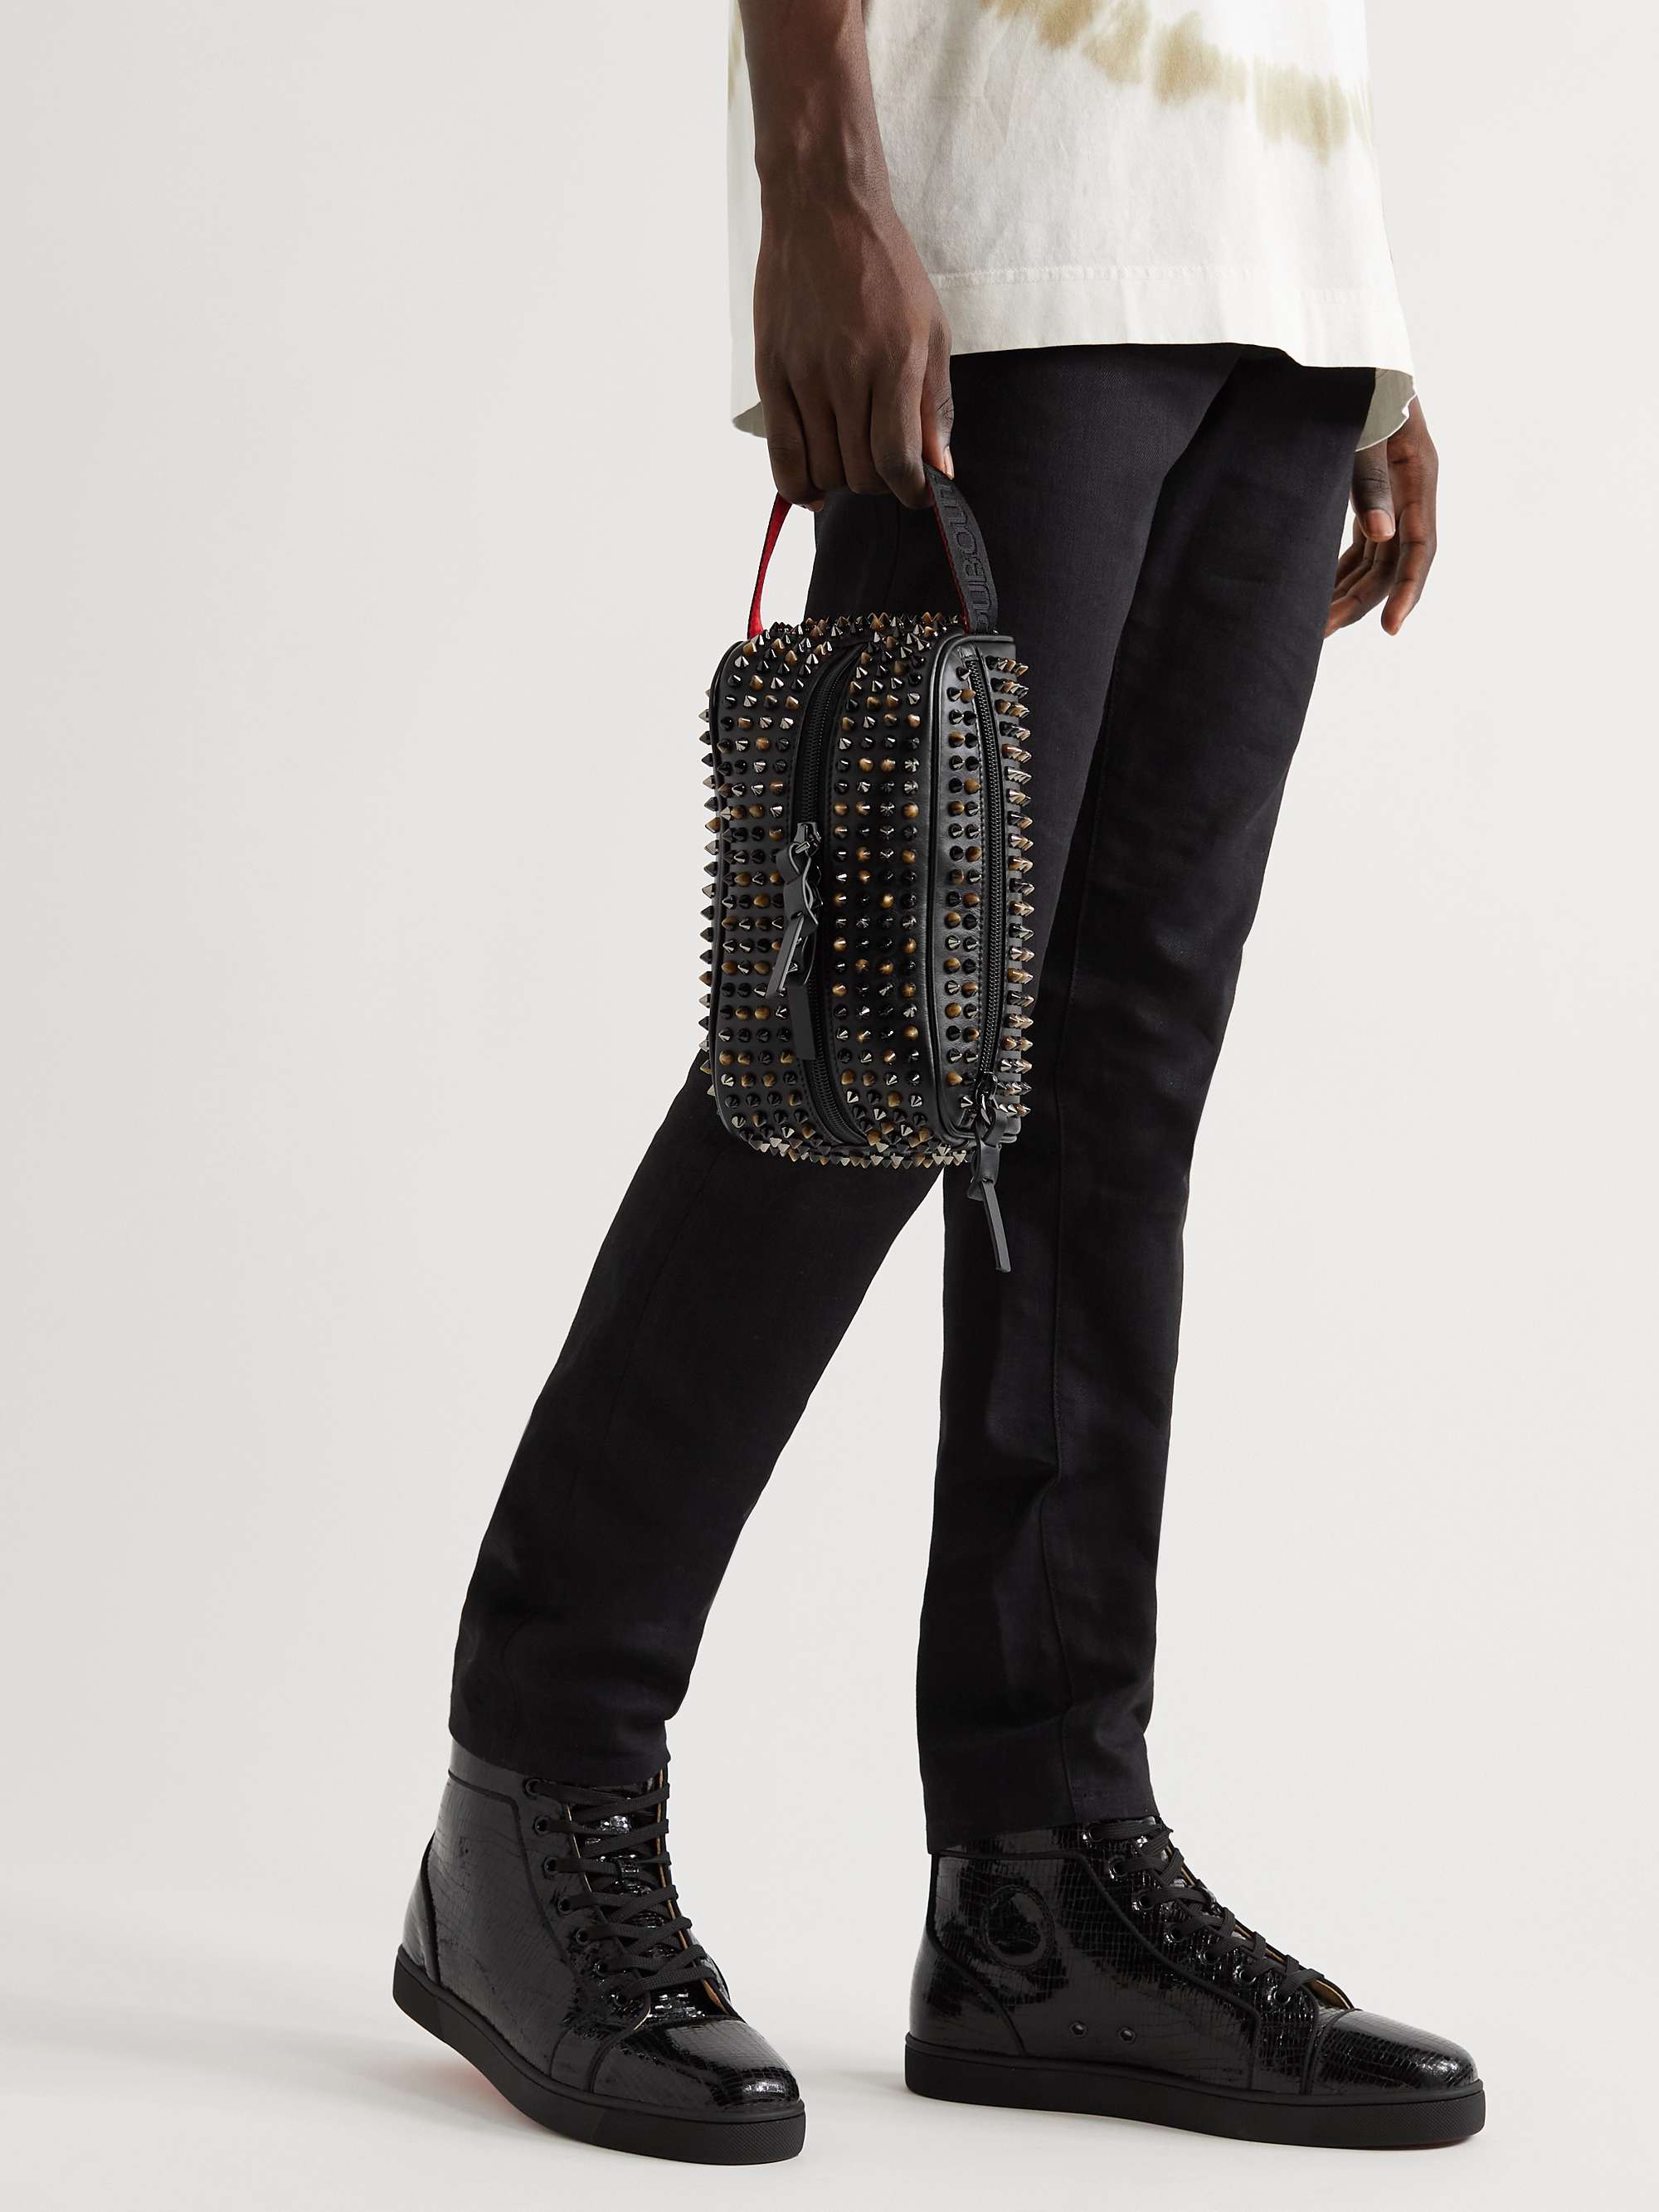 CHRISTIAN LOUBOUTIN Spiked Leather Messenger Bag